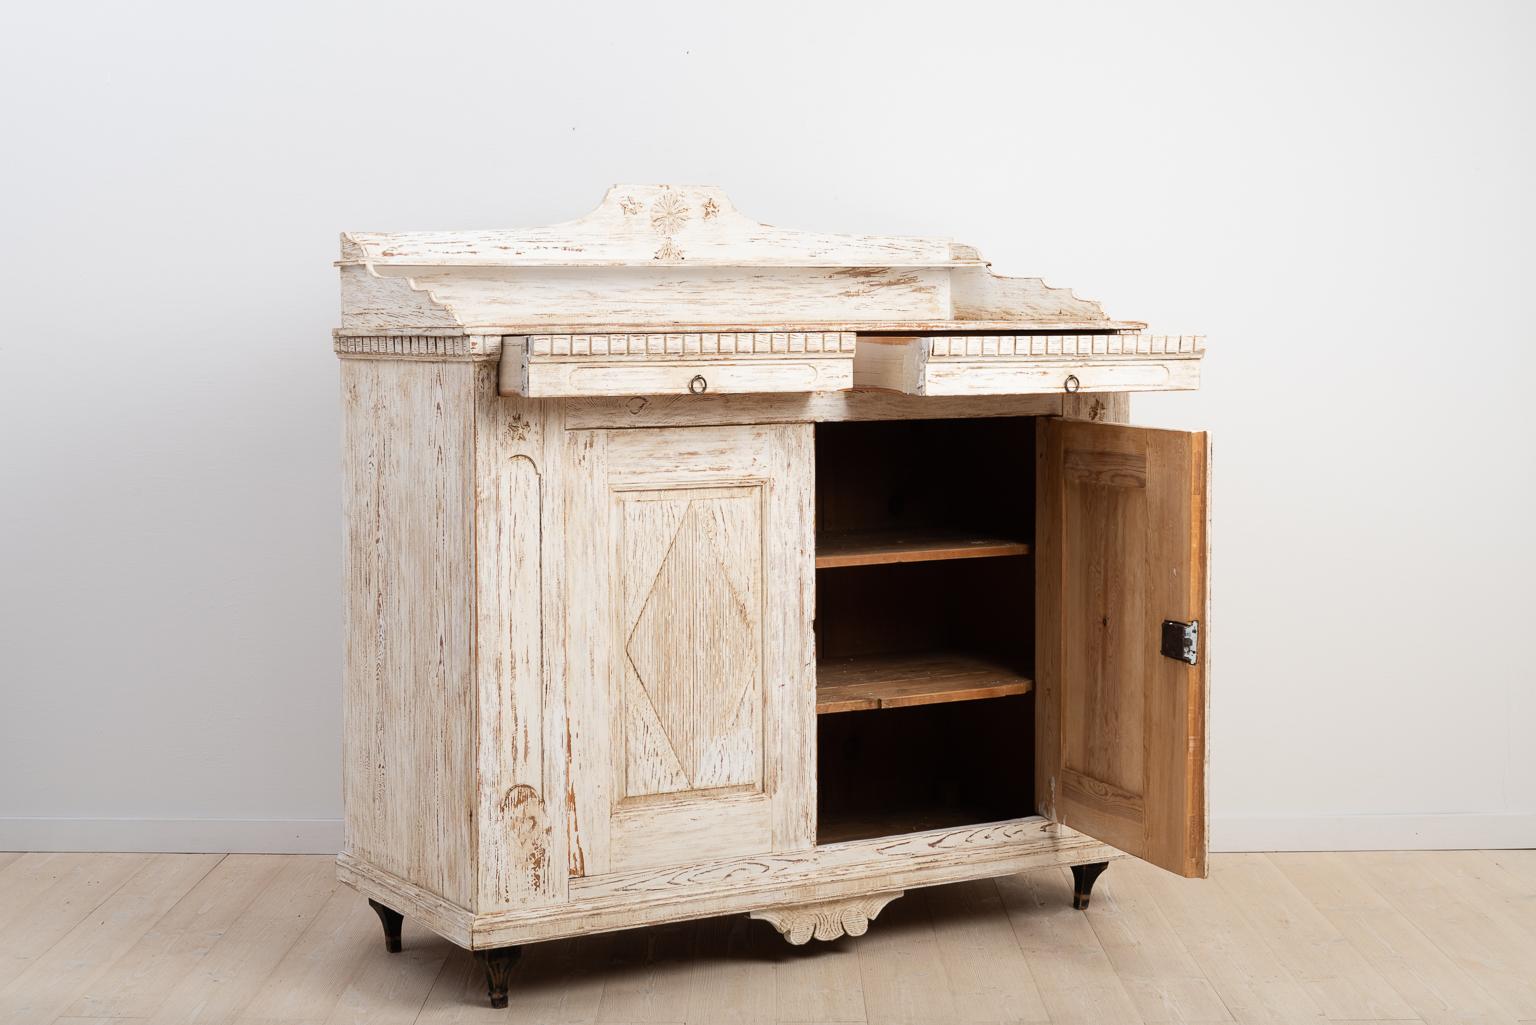 Swedish Gustavian Sideboard from the Late 18th Century with Old Historic Paint (Handbemalt)